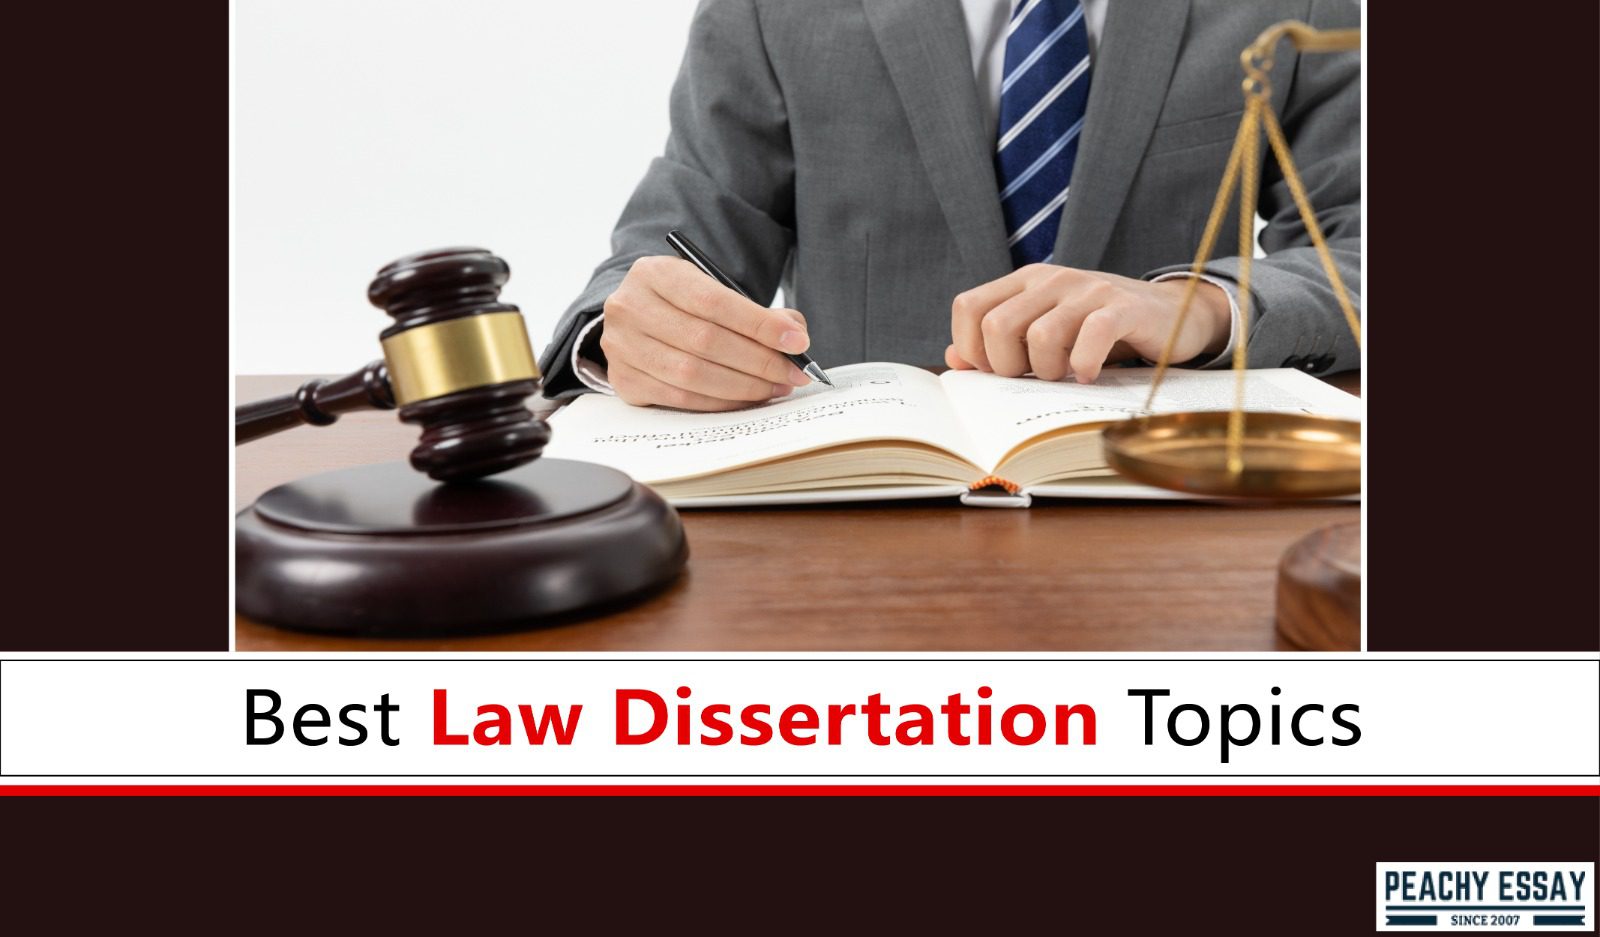 dissertation topics for law students